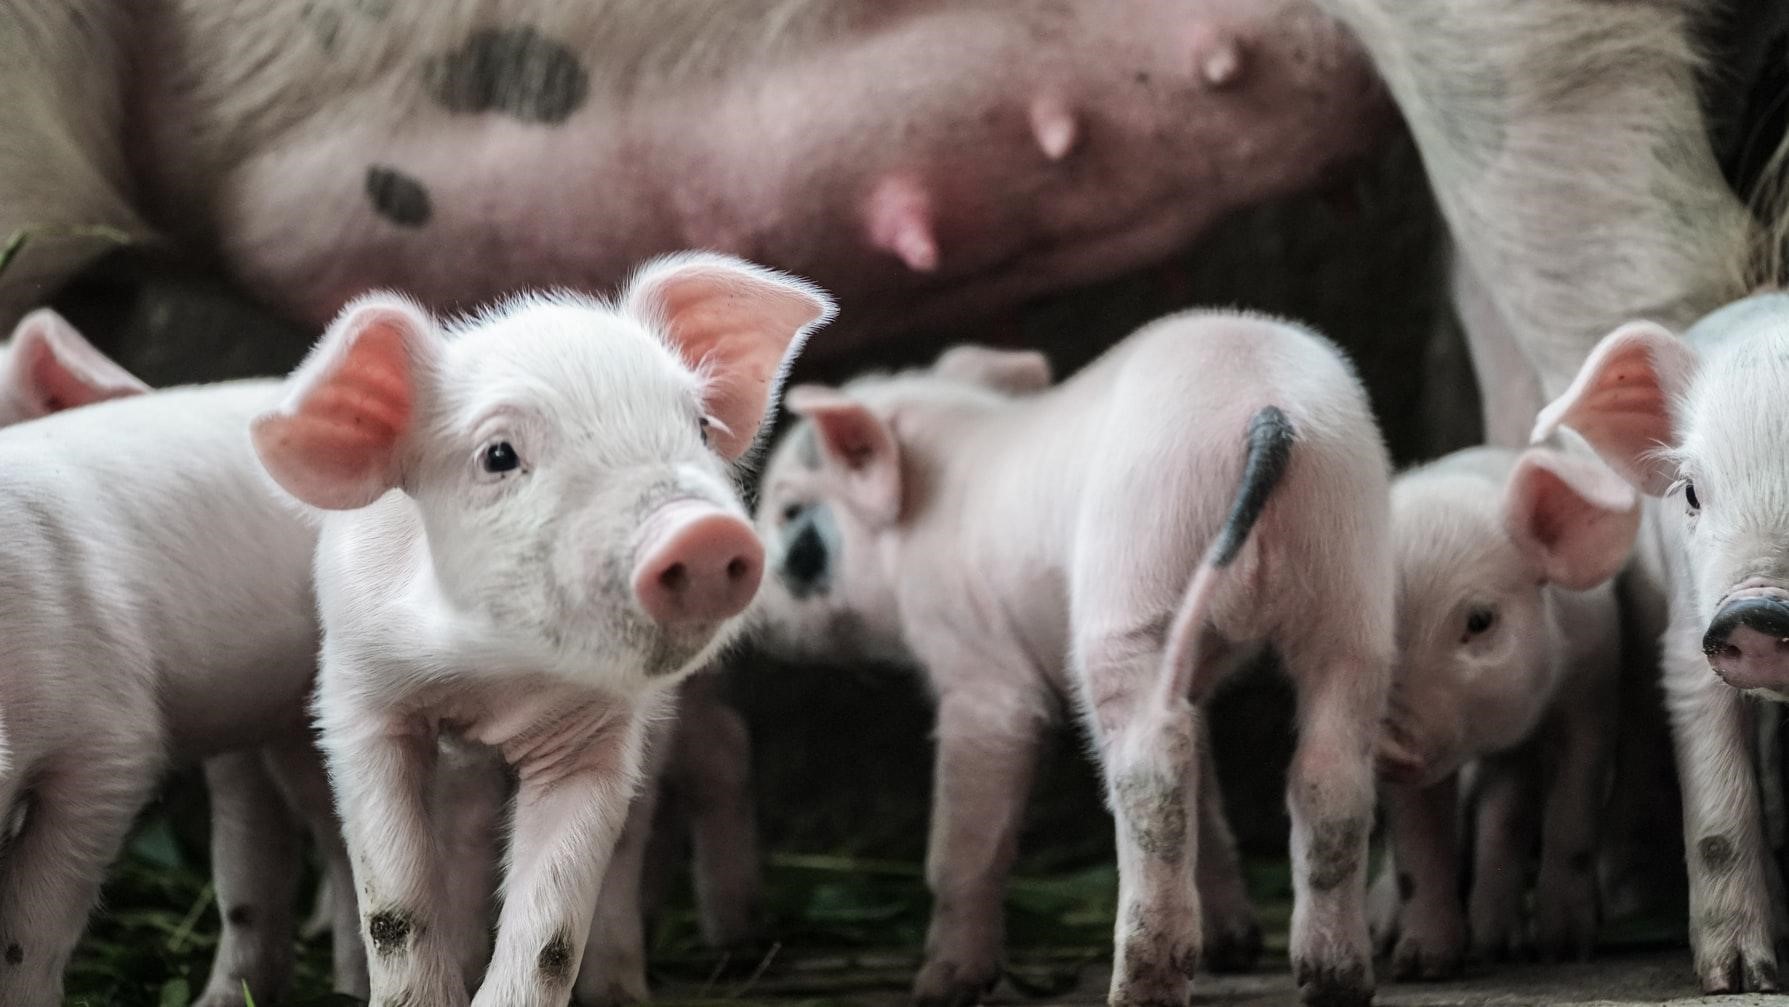 piglets gather around the feet of a sow